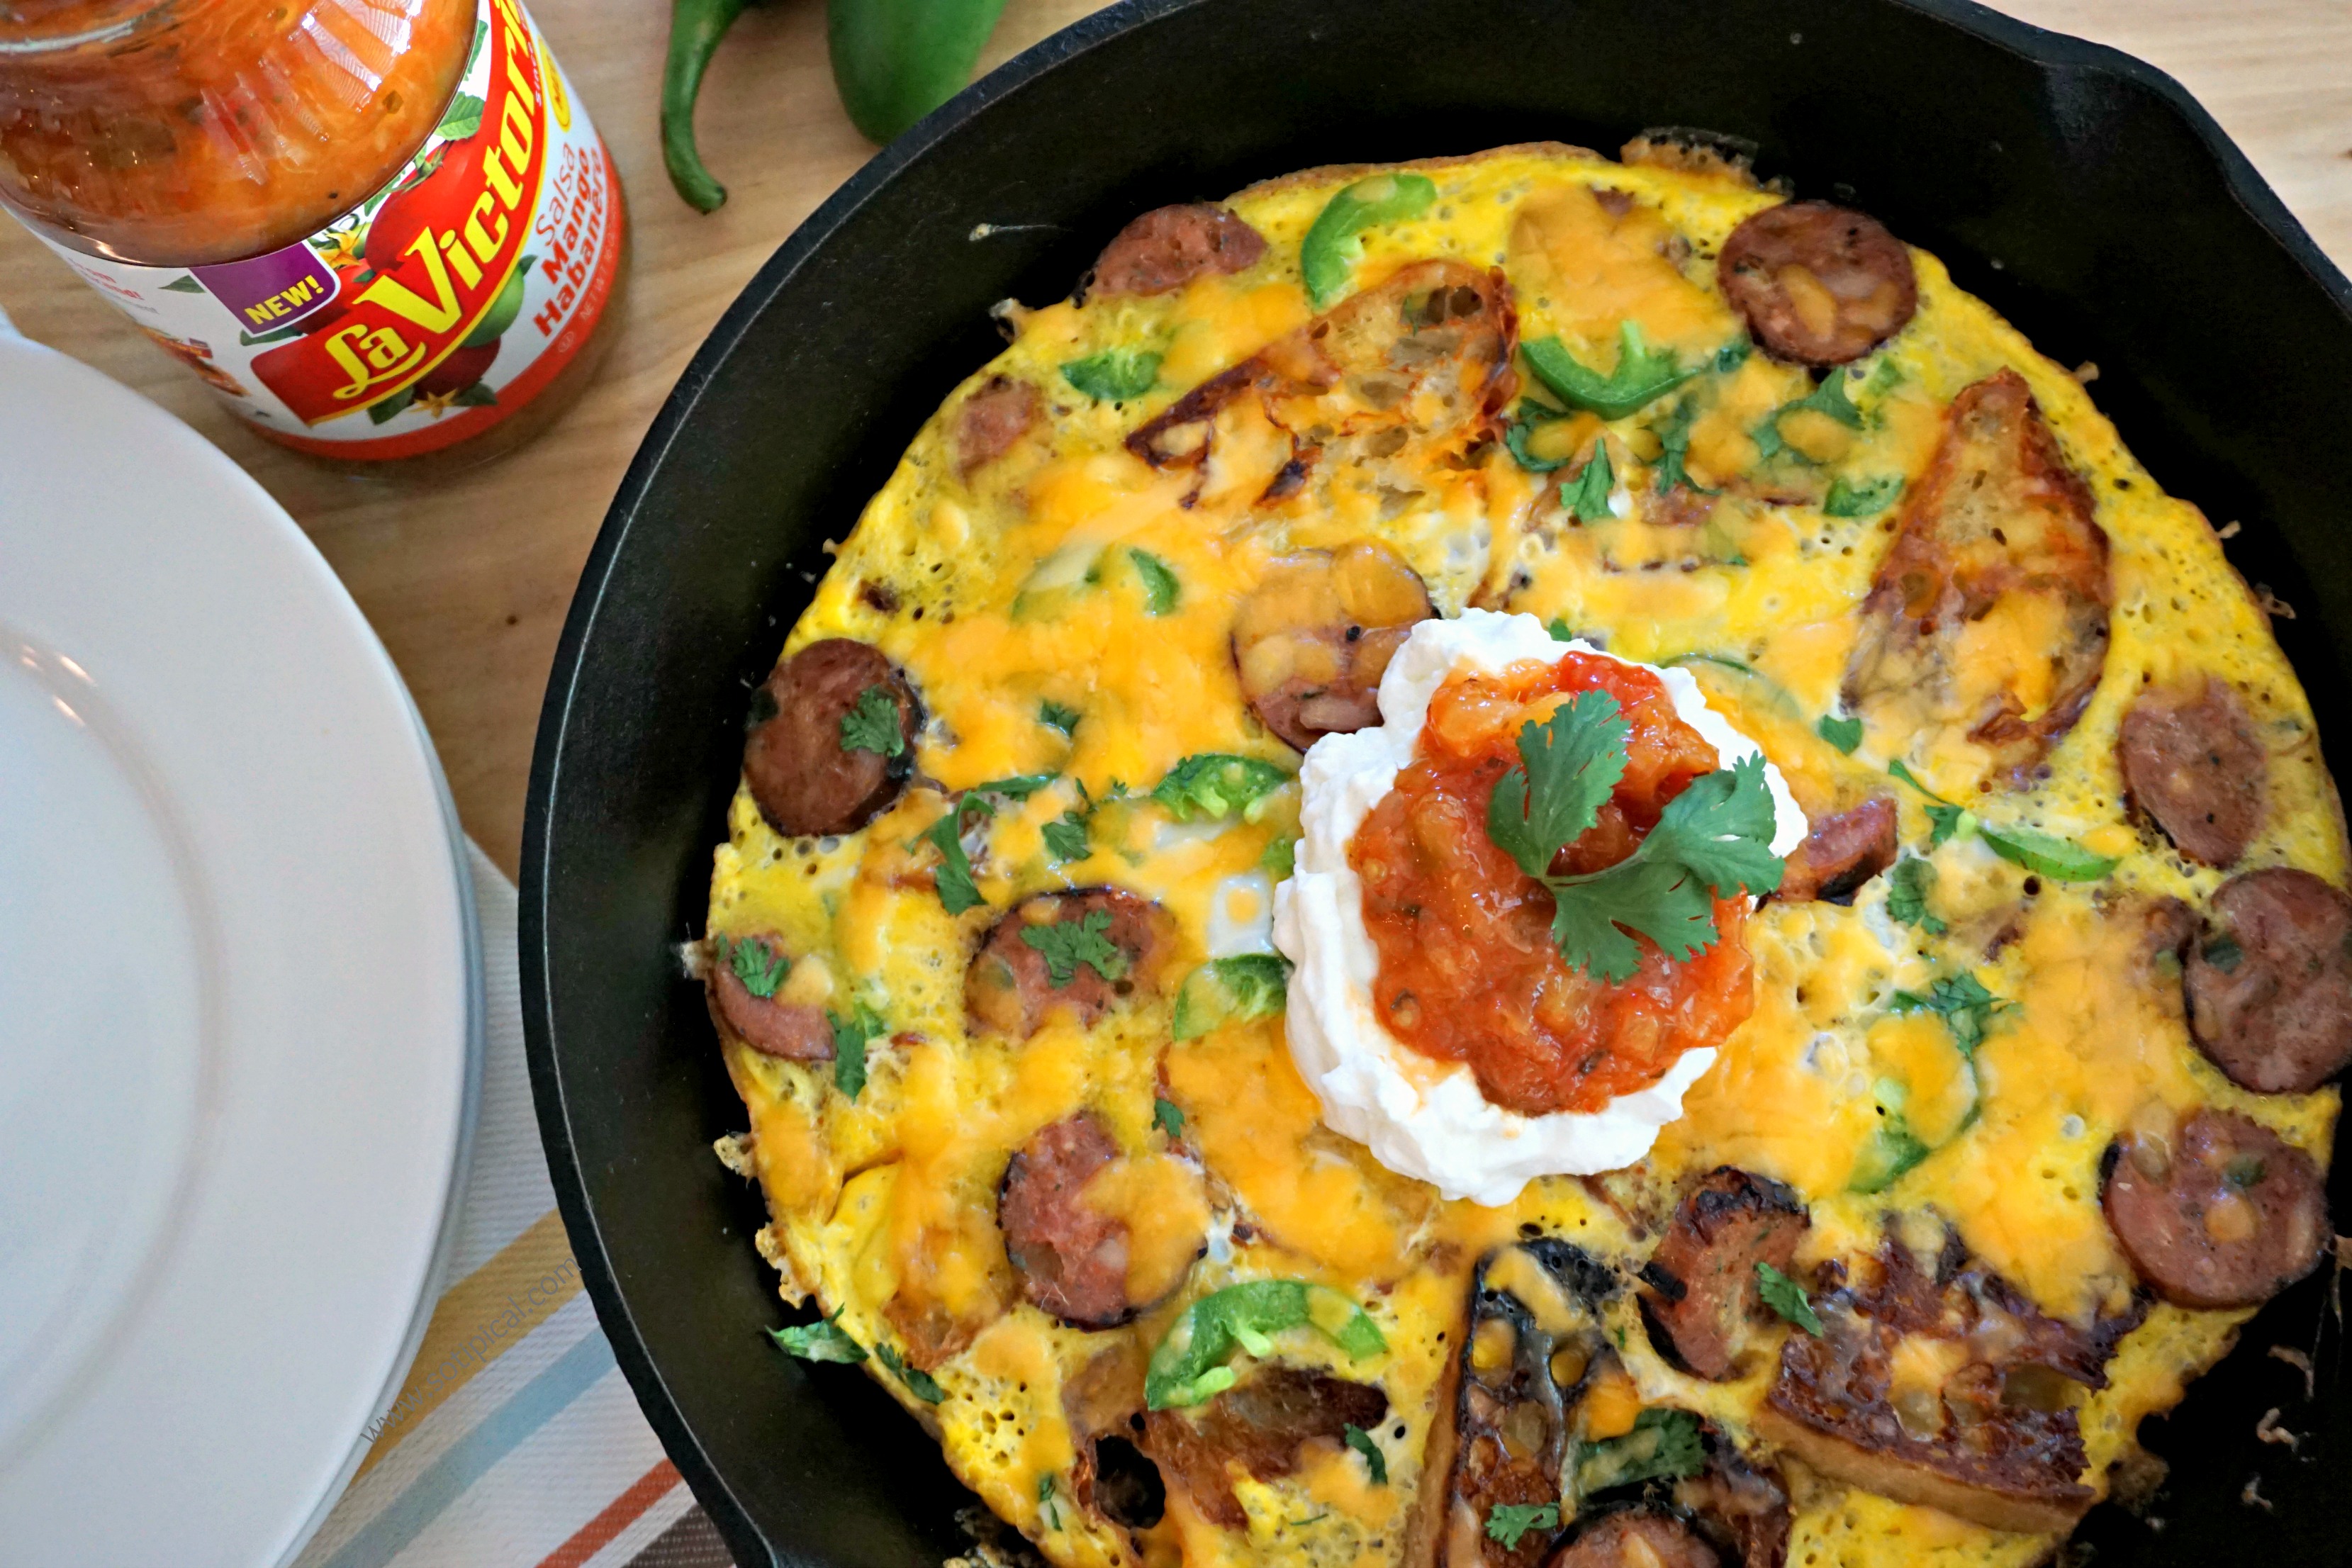 https://www.sotipical.com/wp-content/uploads/2016/07/spicy-sausage-frittata-1.jpg